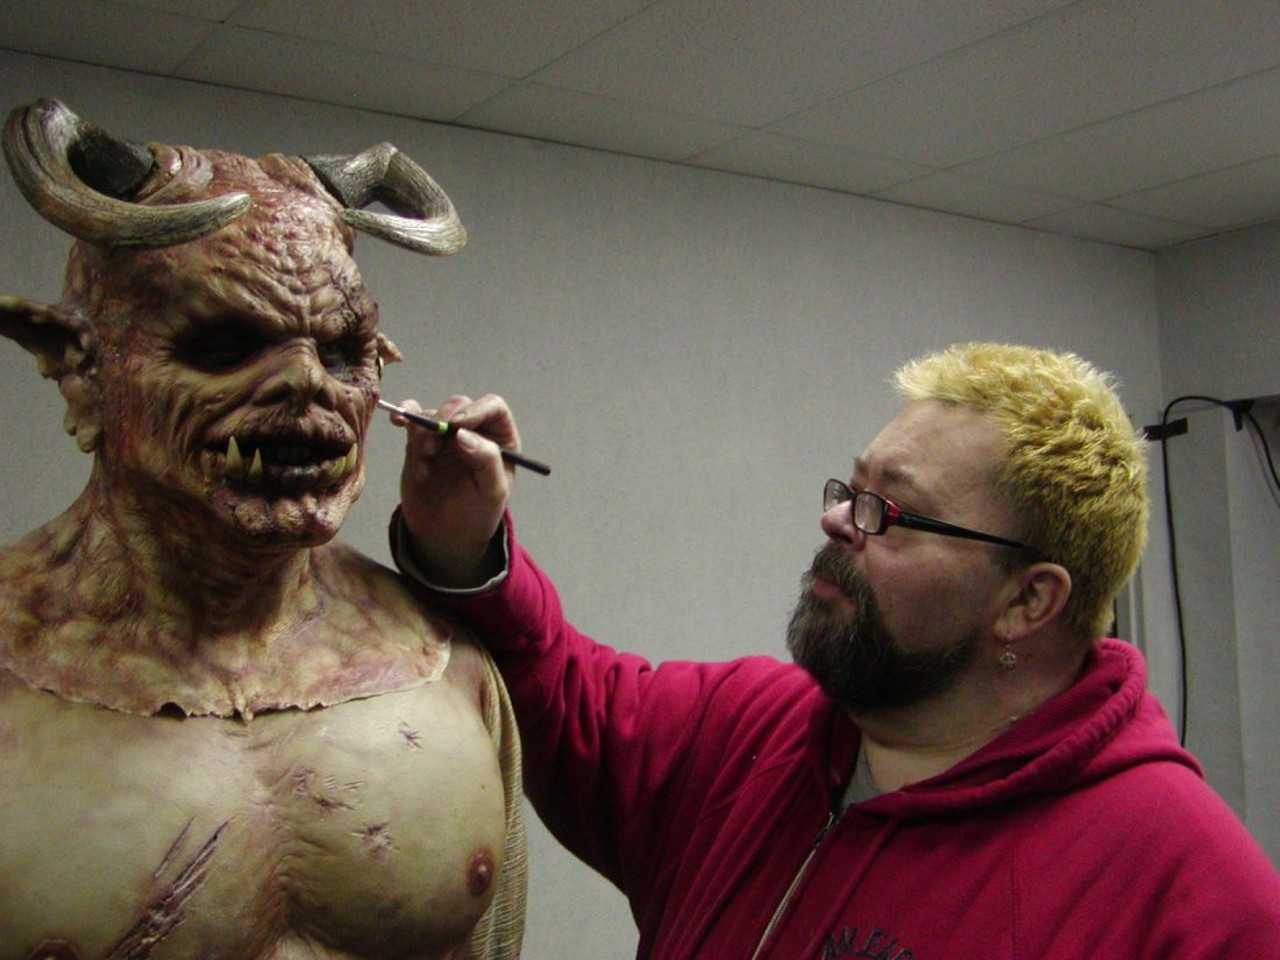 Alan Tuskes putting some finishing touches on a devil.